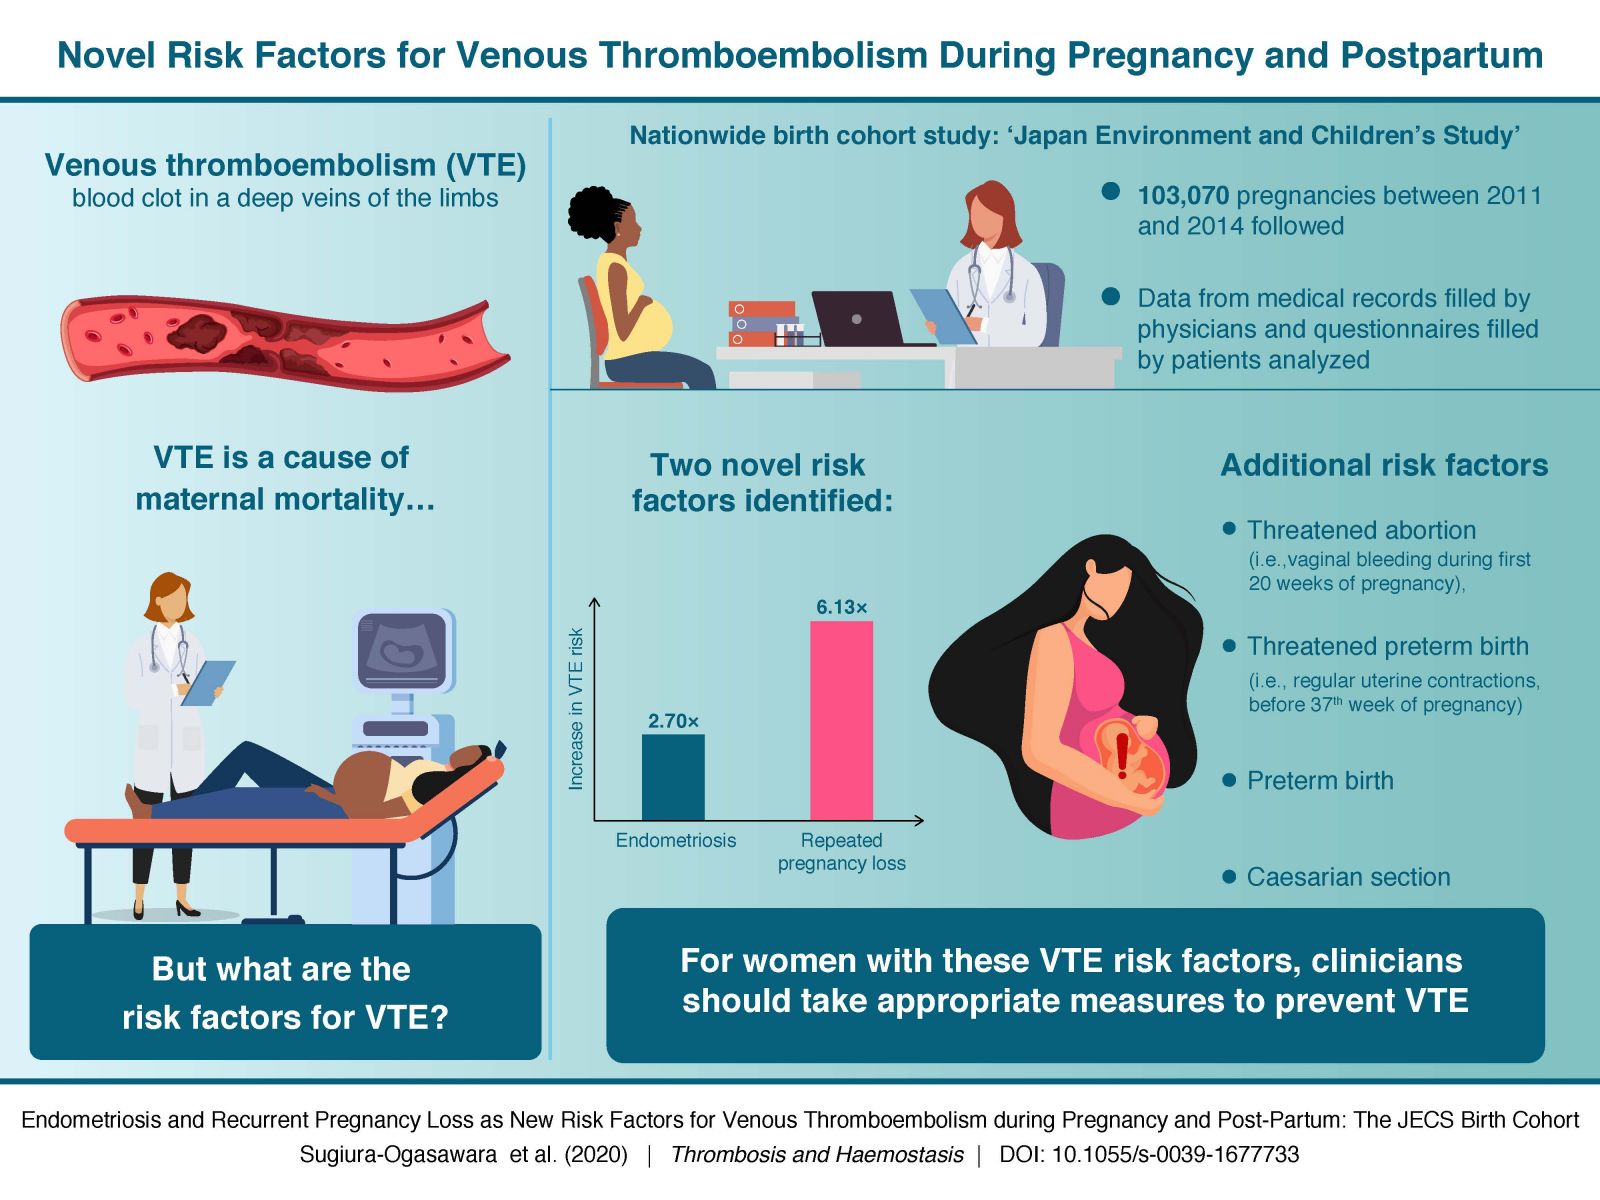 New Risk Factors for Venous Thromboembolism During Pregnancy and Postpartum